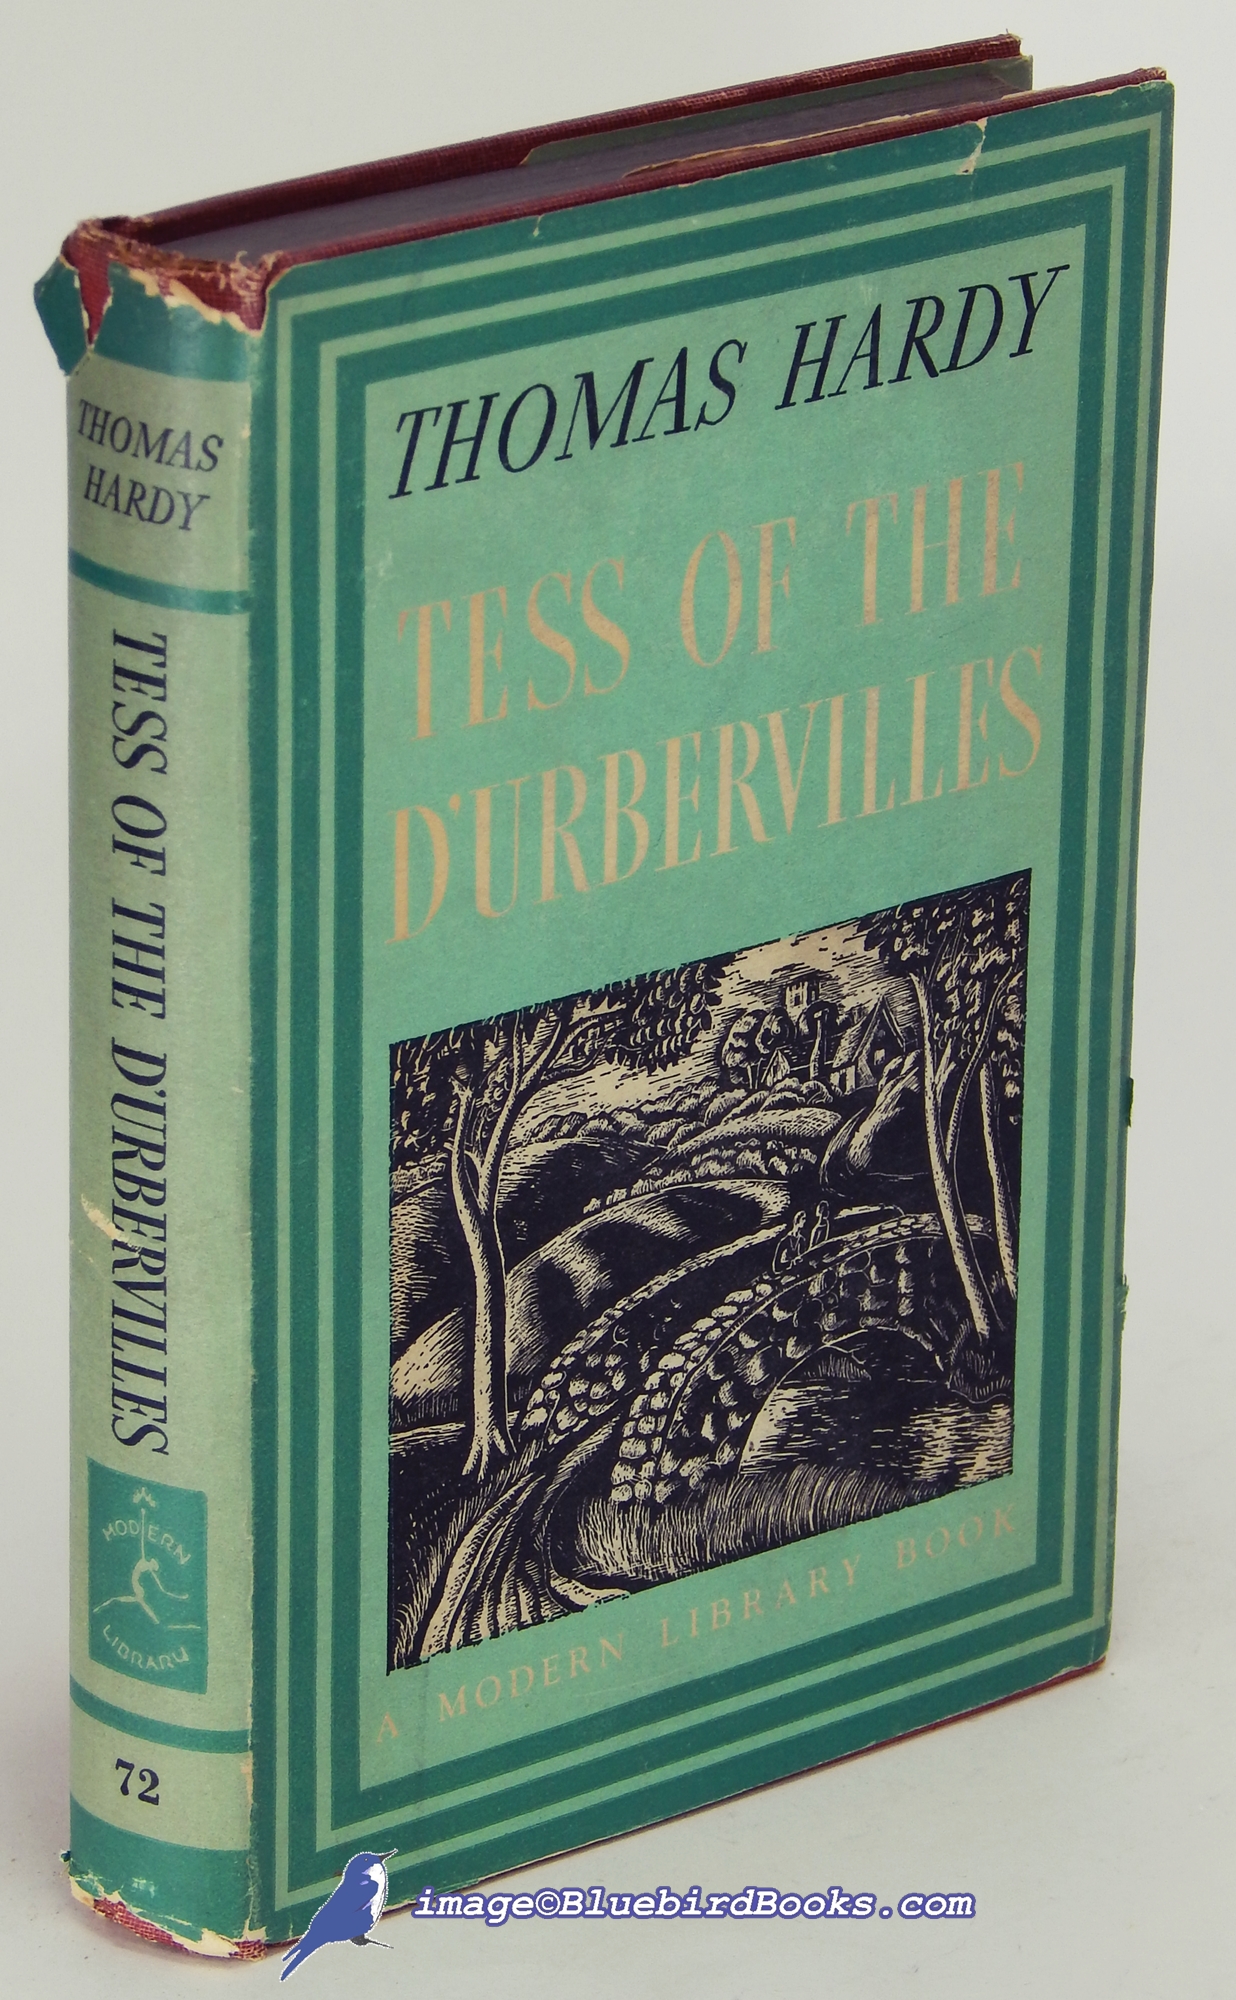 HARDY, THOMAS - Tess of the D'Urbervilles (Modern Library, 72. 2)